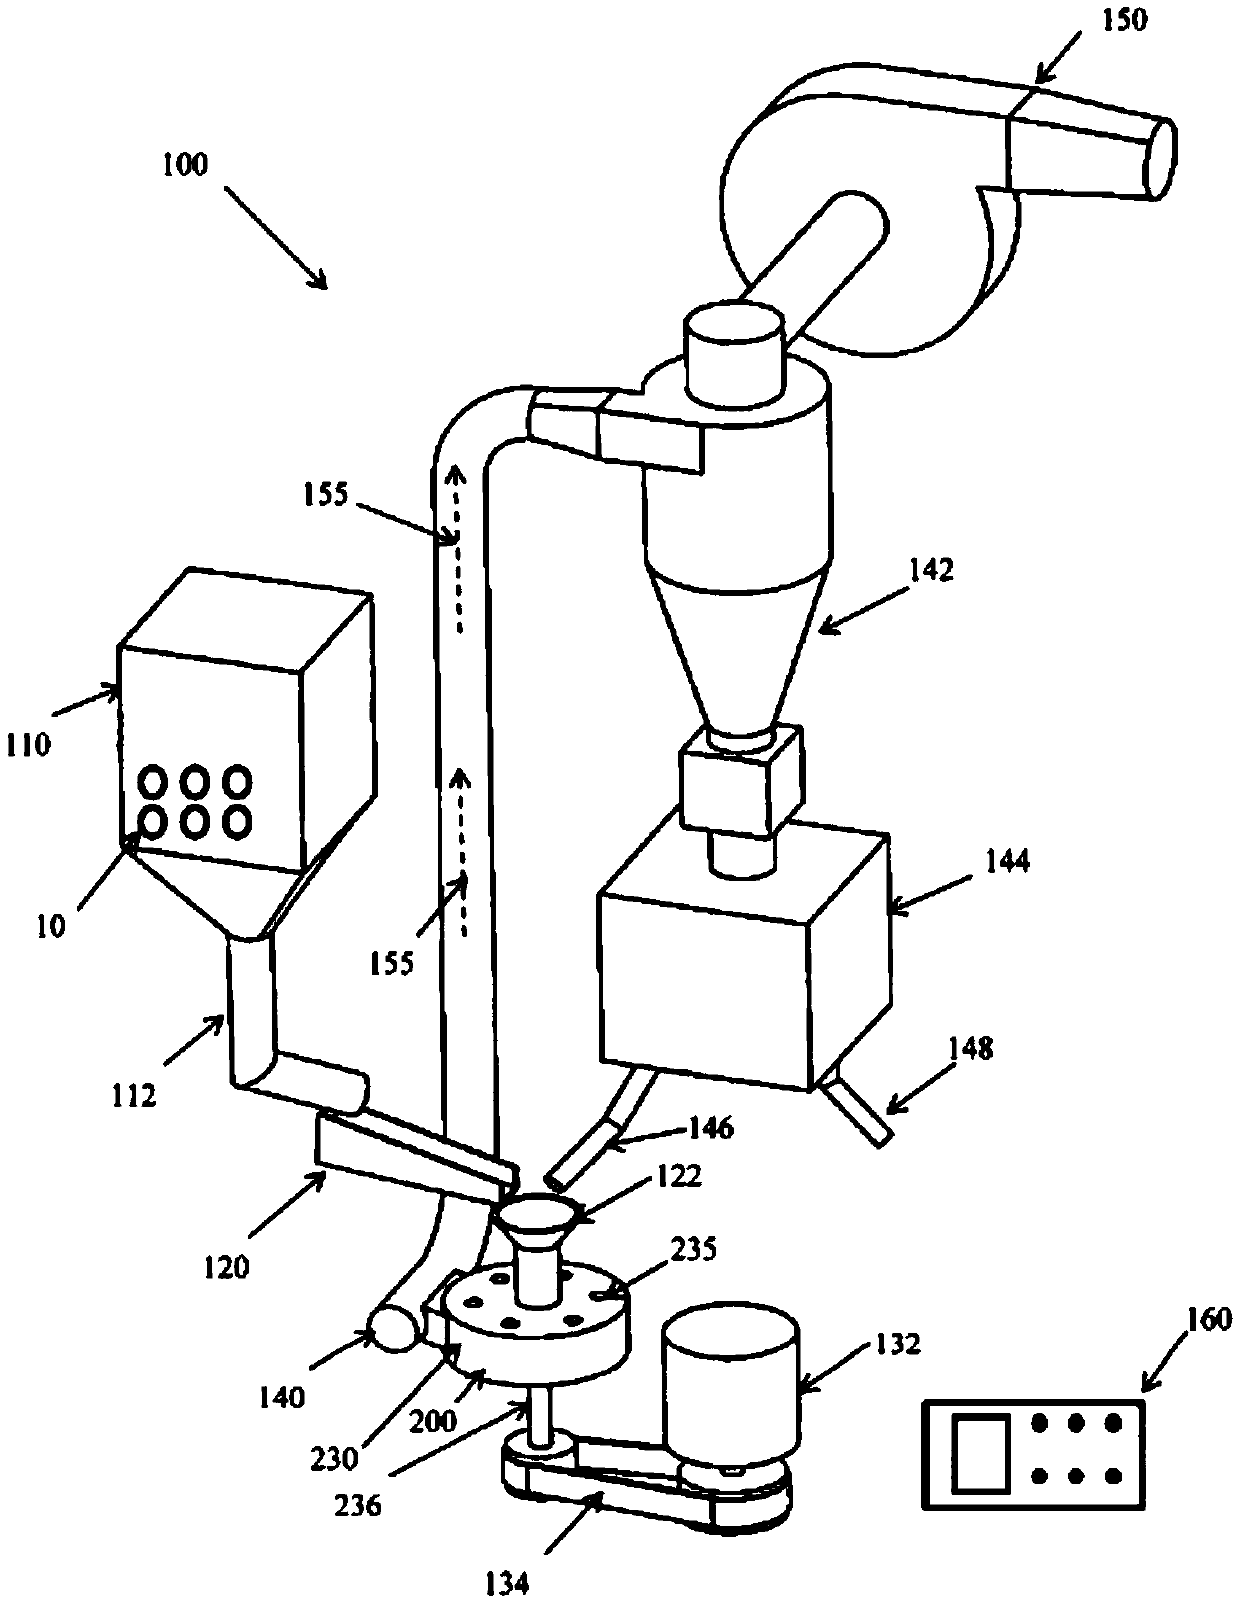 Air-cooled rotary disc and mill assembly for pulverizers